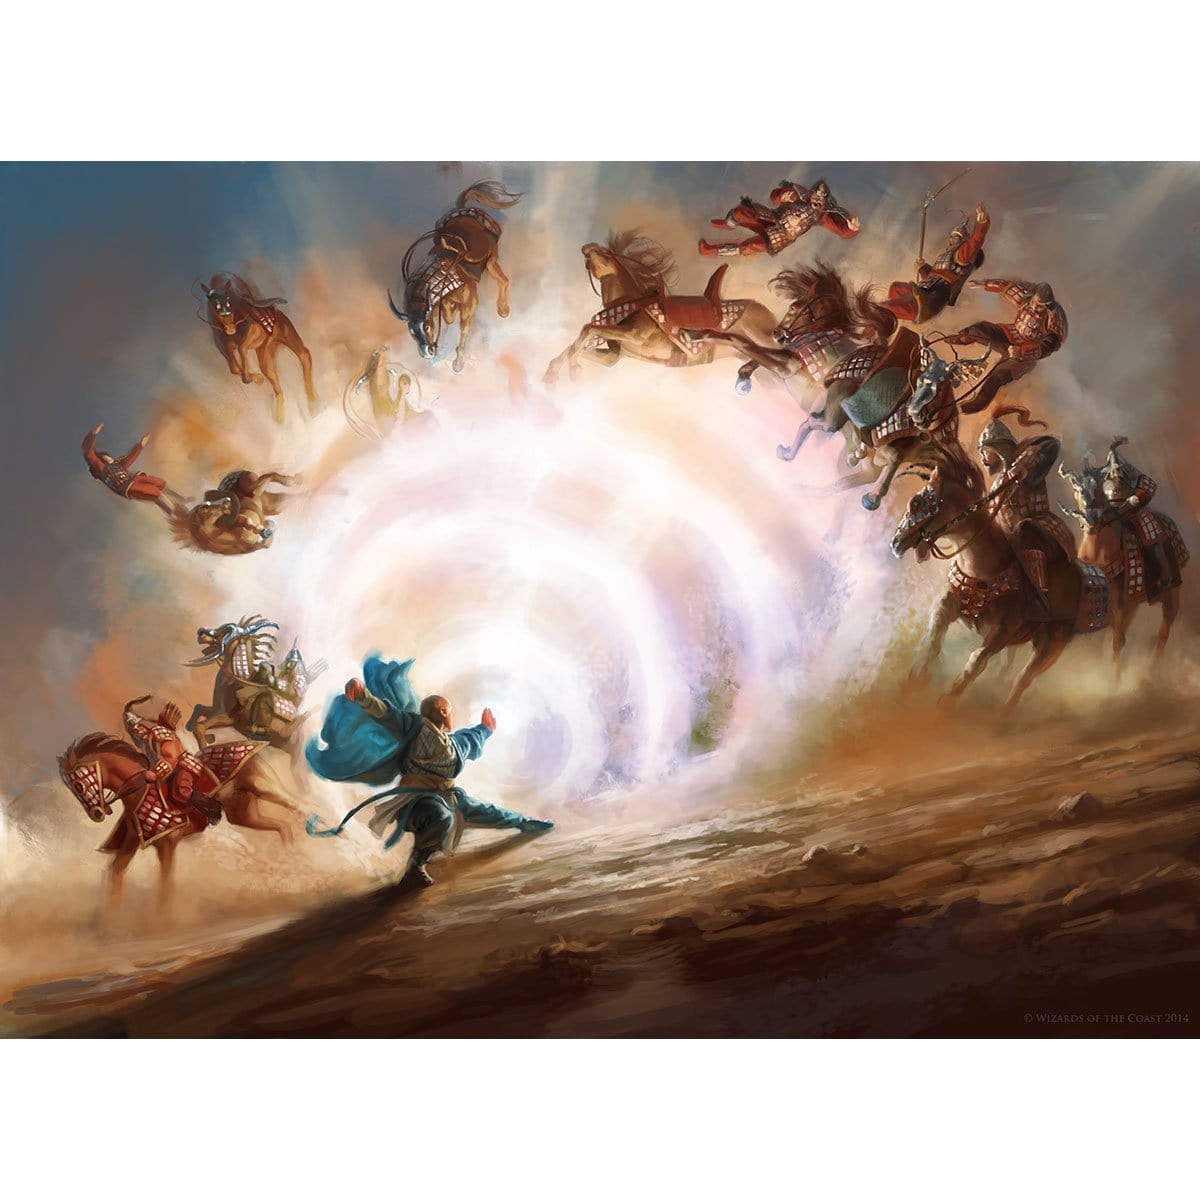 End Hostilities Print - Print - Original Magic Art - Accessories for Magic the Gathering and other card games